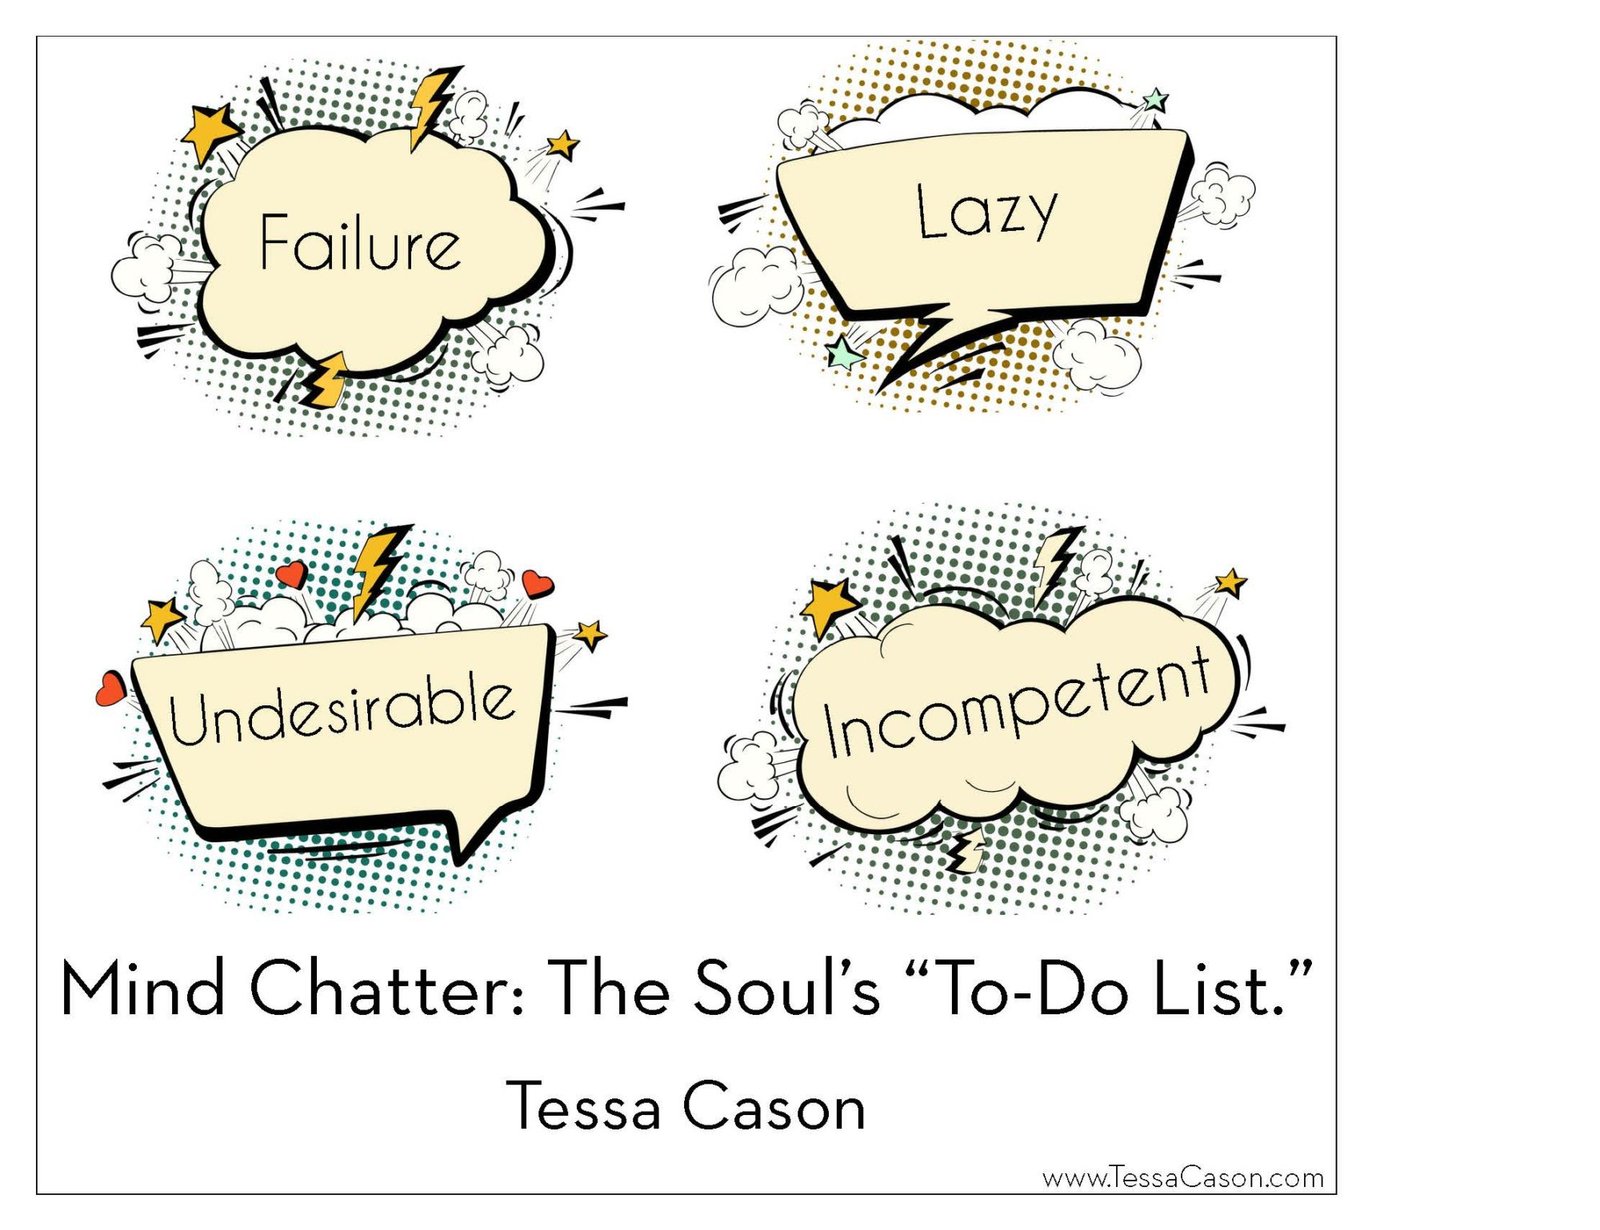 Mind Chatter The Soul's to do list